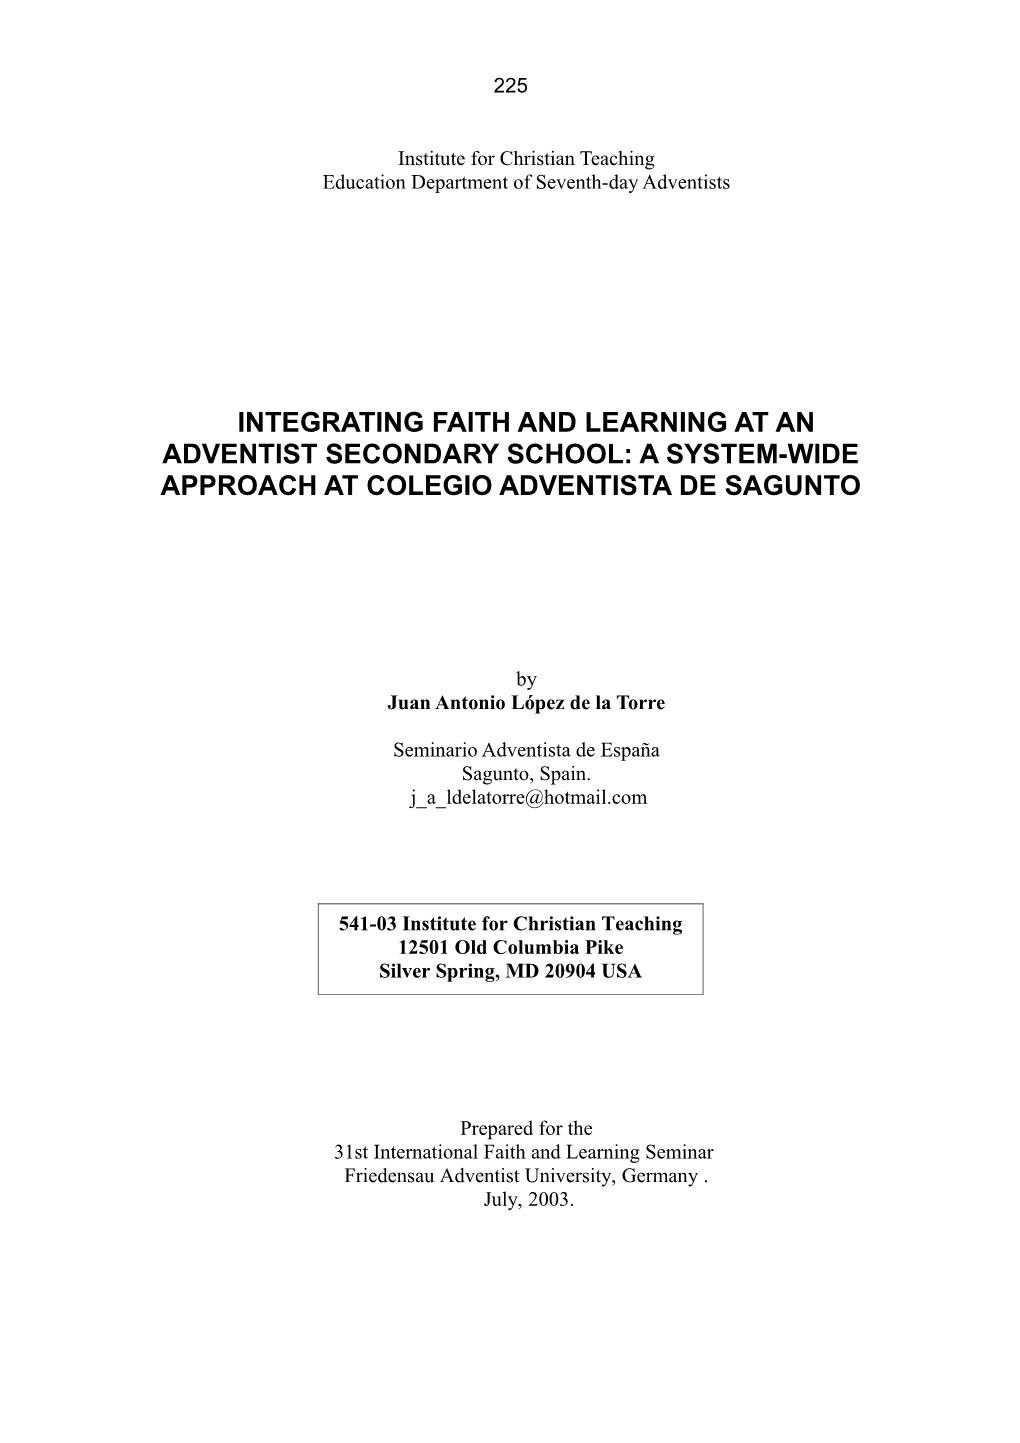 31 First Seminar on the Integration of Faith and Learning